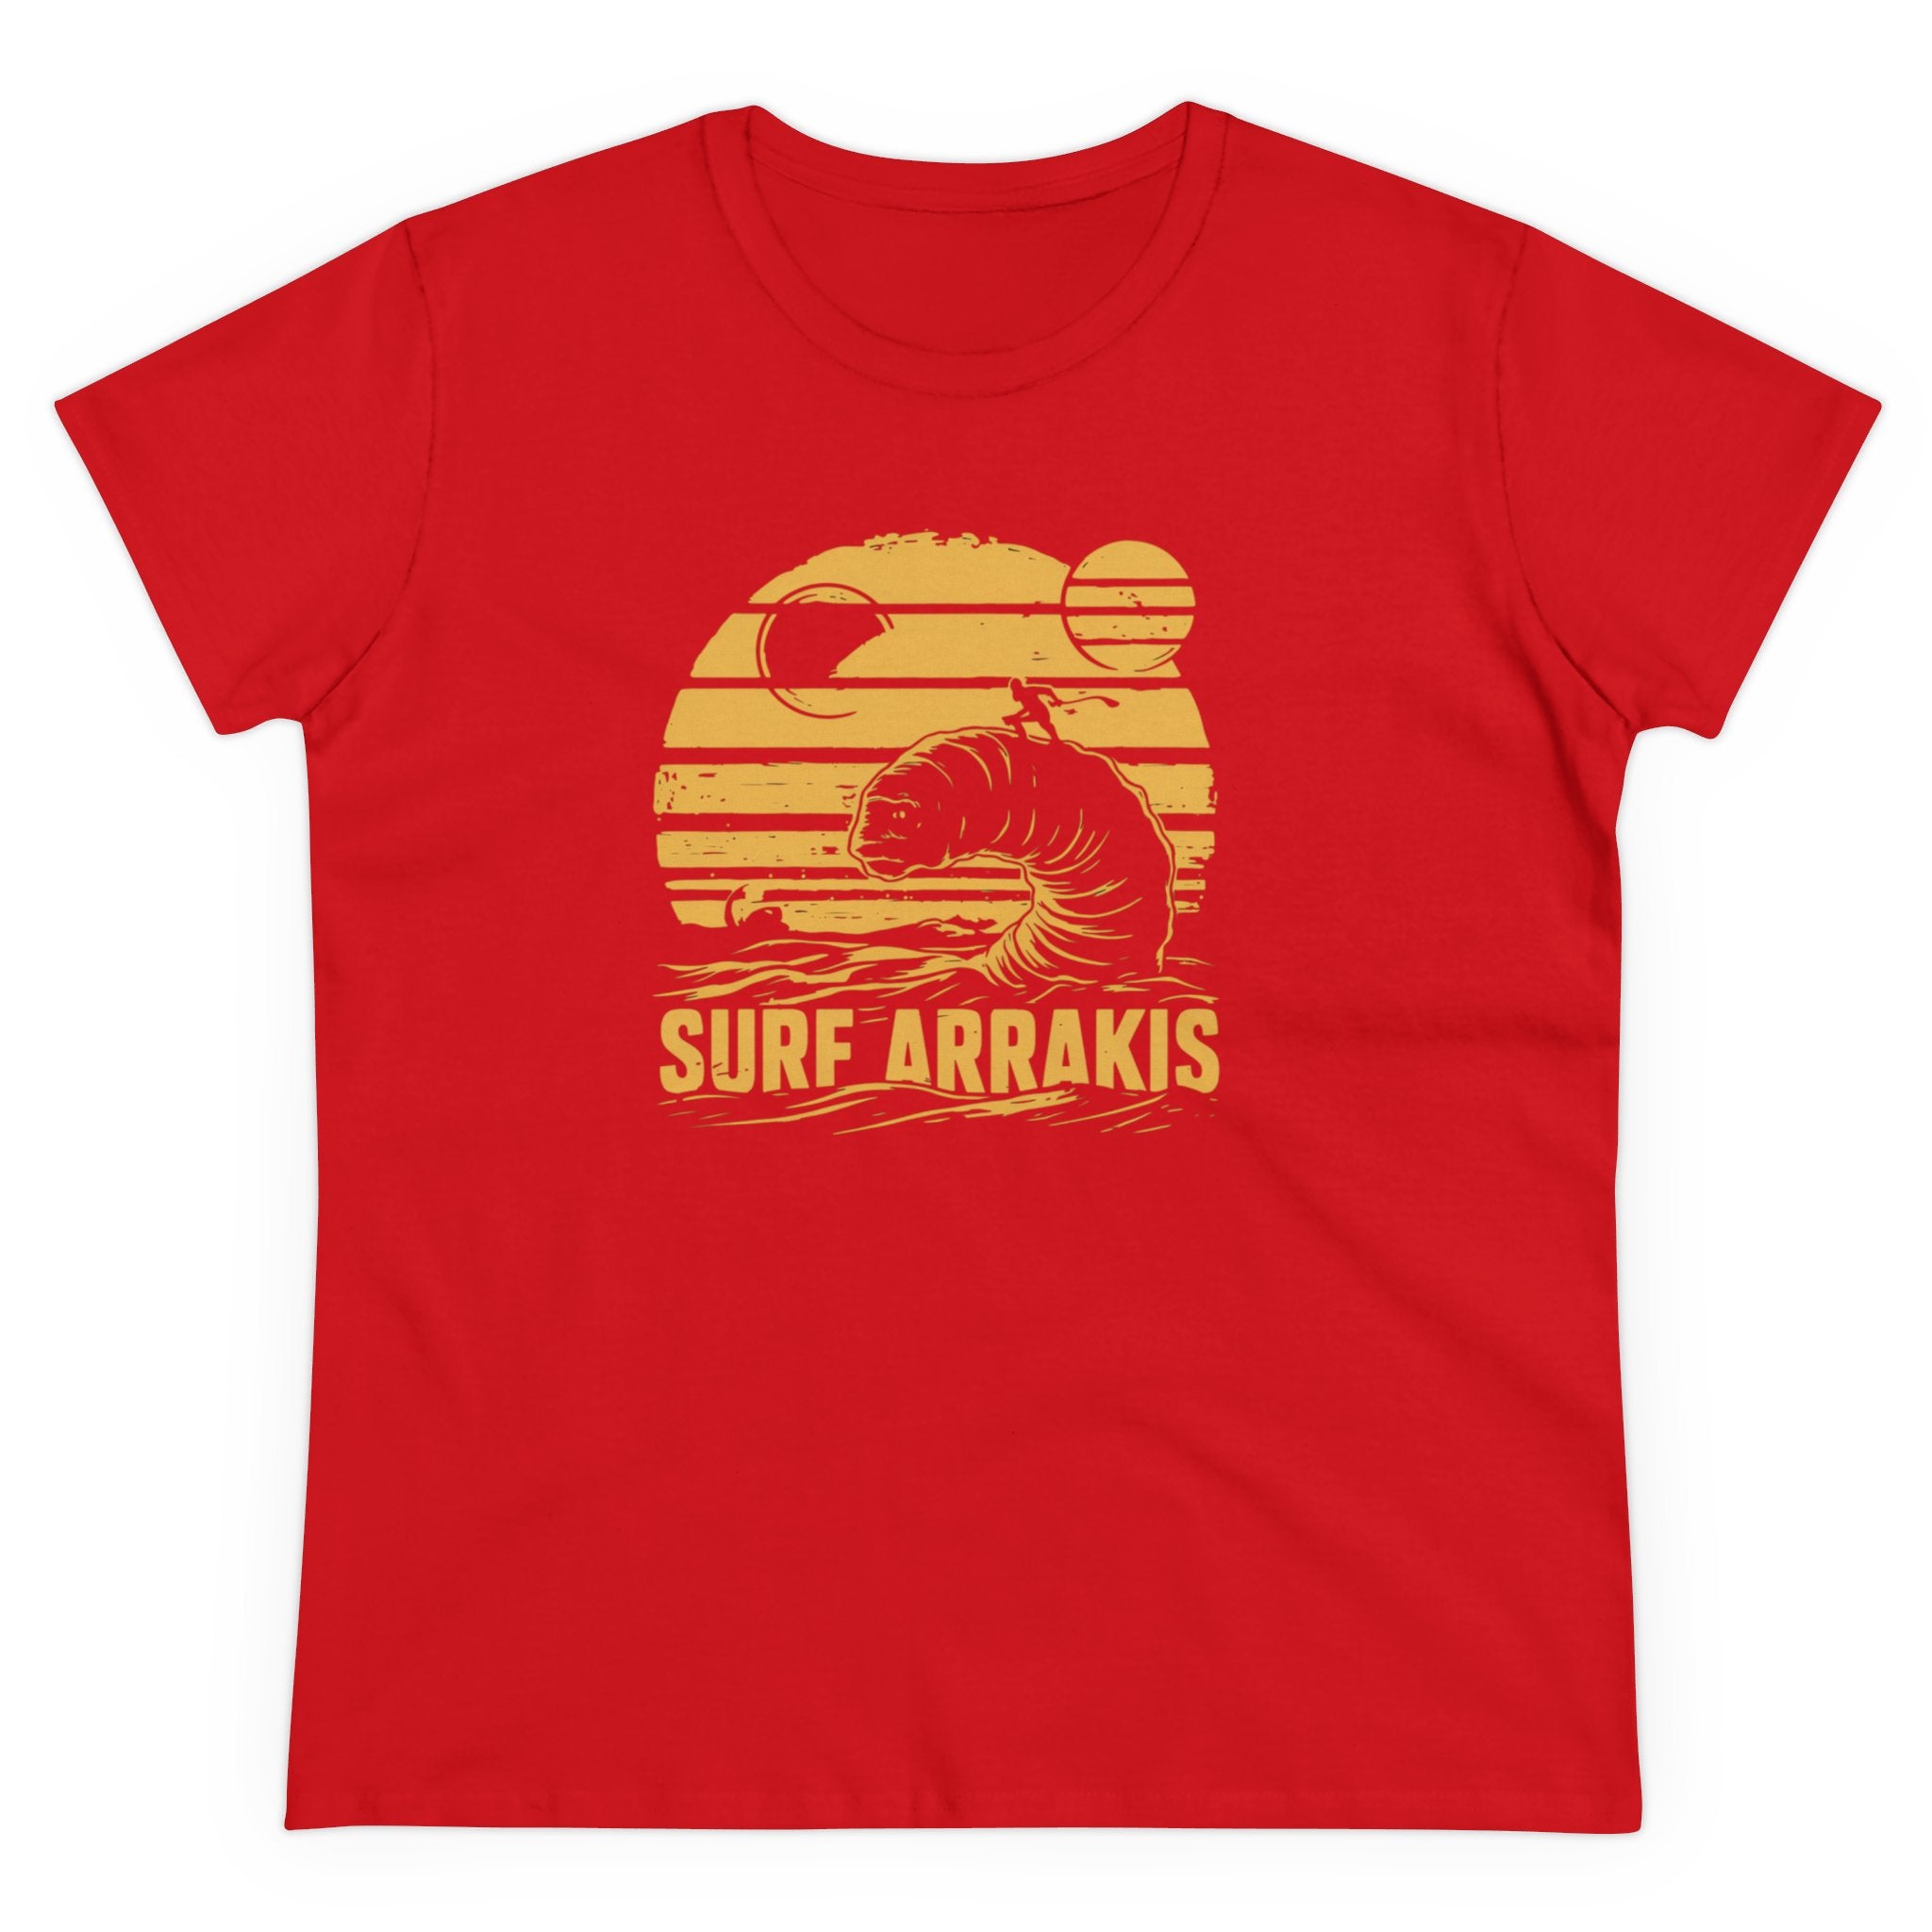 Red T-shirt featuring a yellow design of a sand worm and two moons with the text "Surf Arrakis." Crafted from soft light cotton, this pre-shrunk comfy design ensures lasting comfort. Get ready to rock the unique style of our Surf Arrakis - Women's Tee.